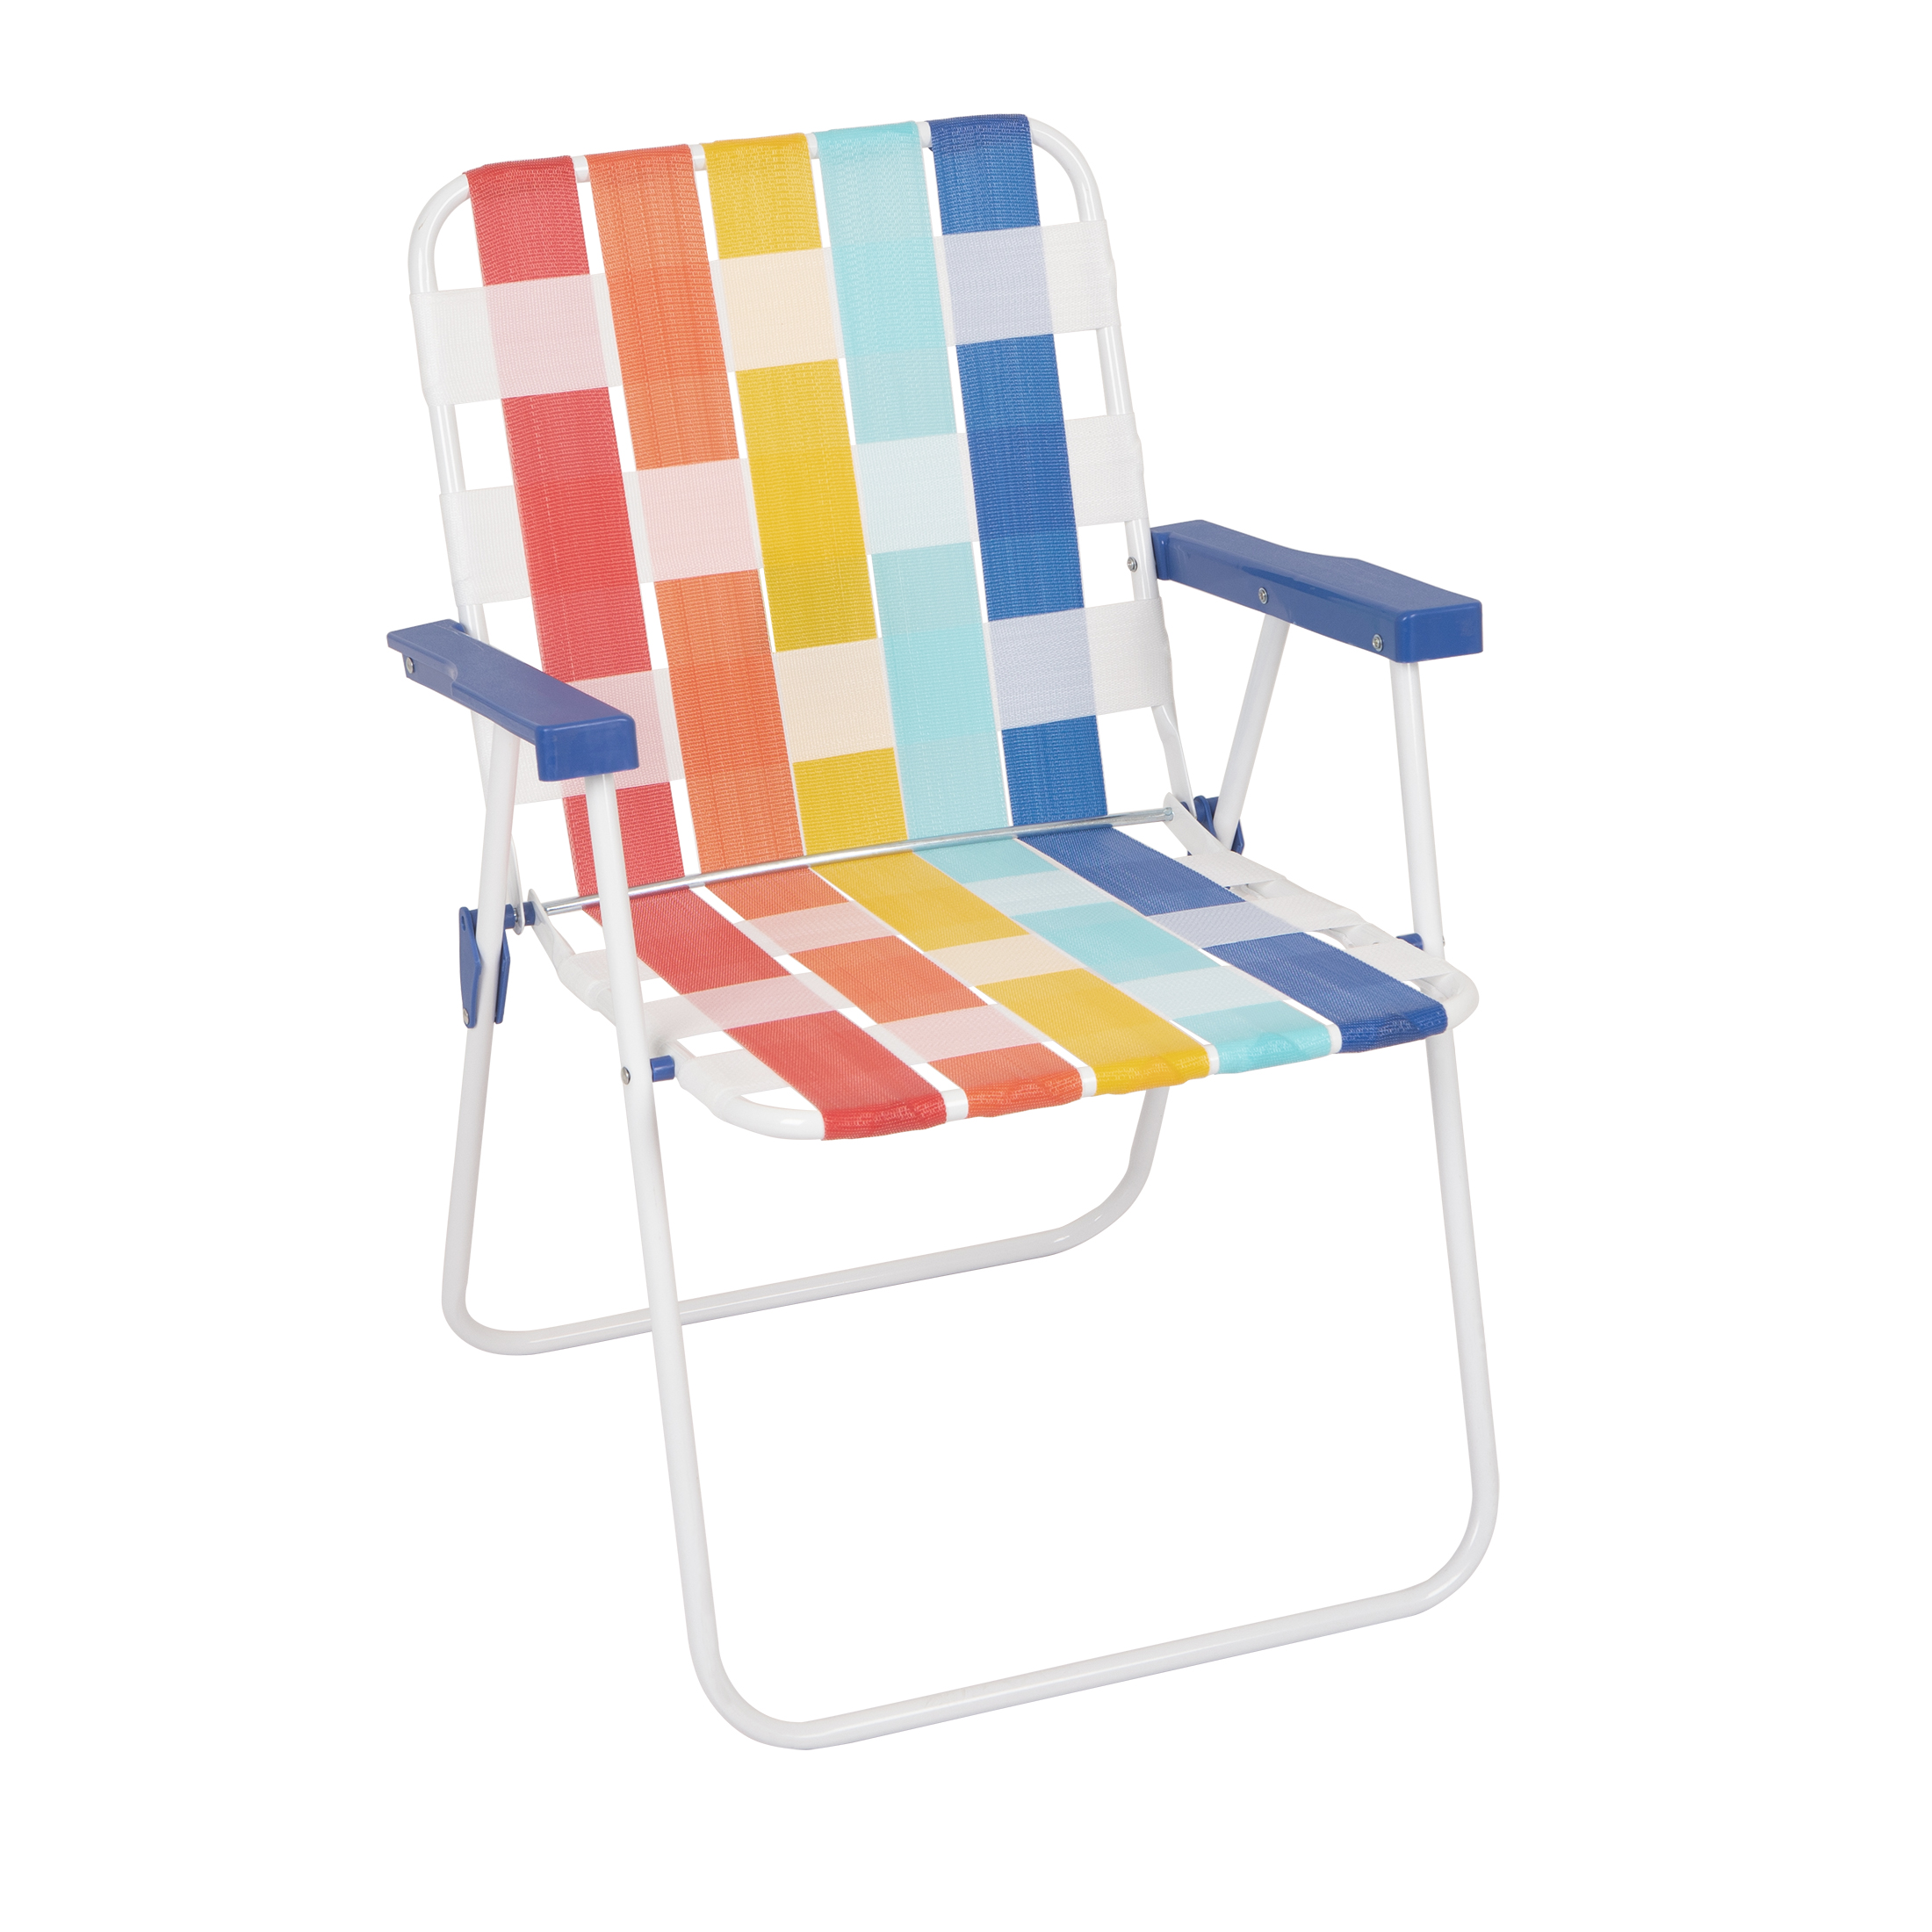 Mainstays Folding Beach Web Chair, Multicolor - image 2 of 9